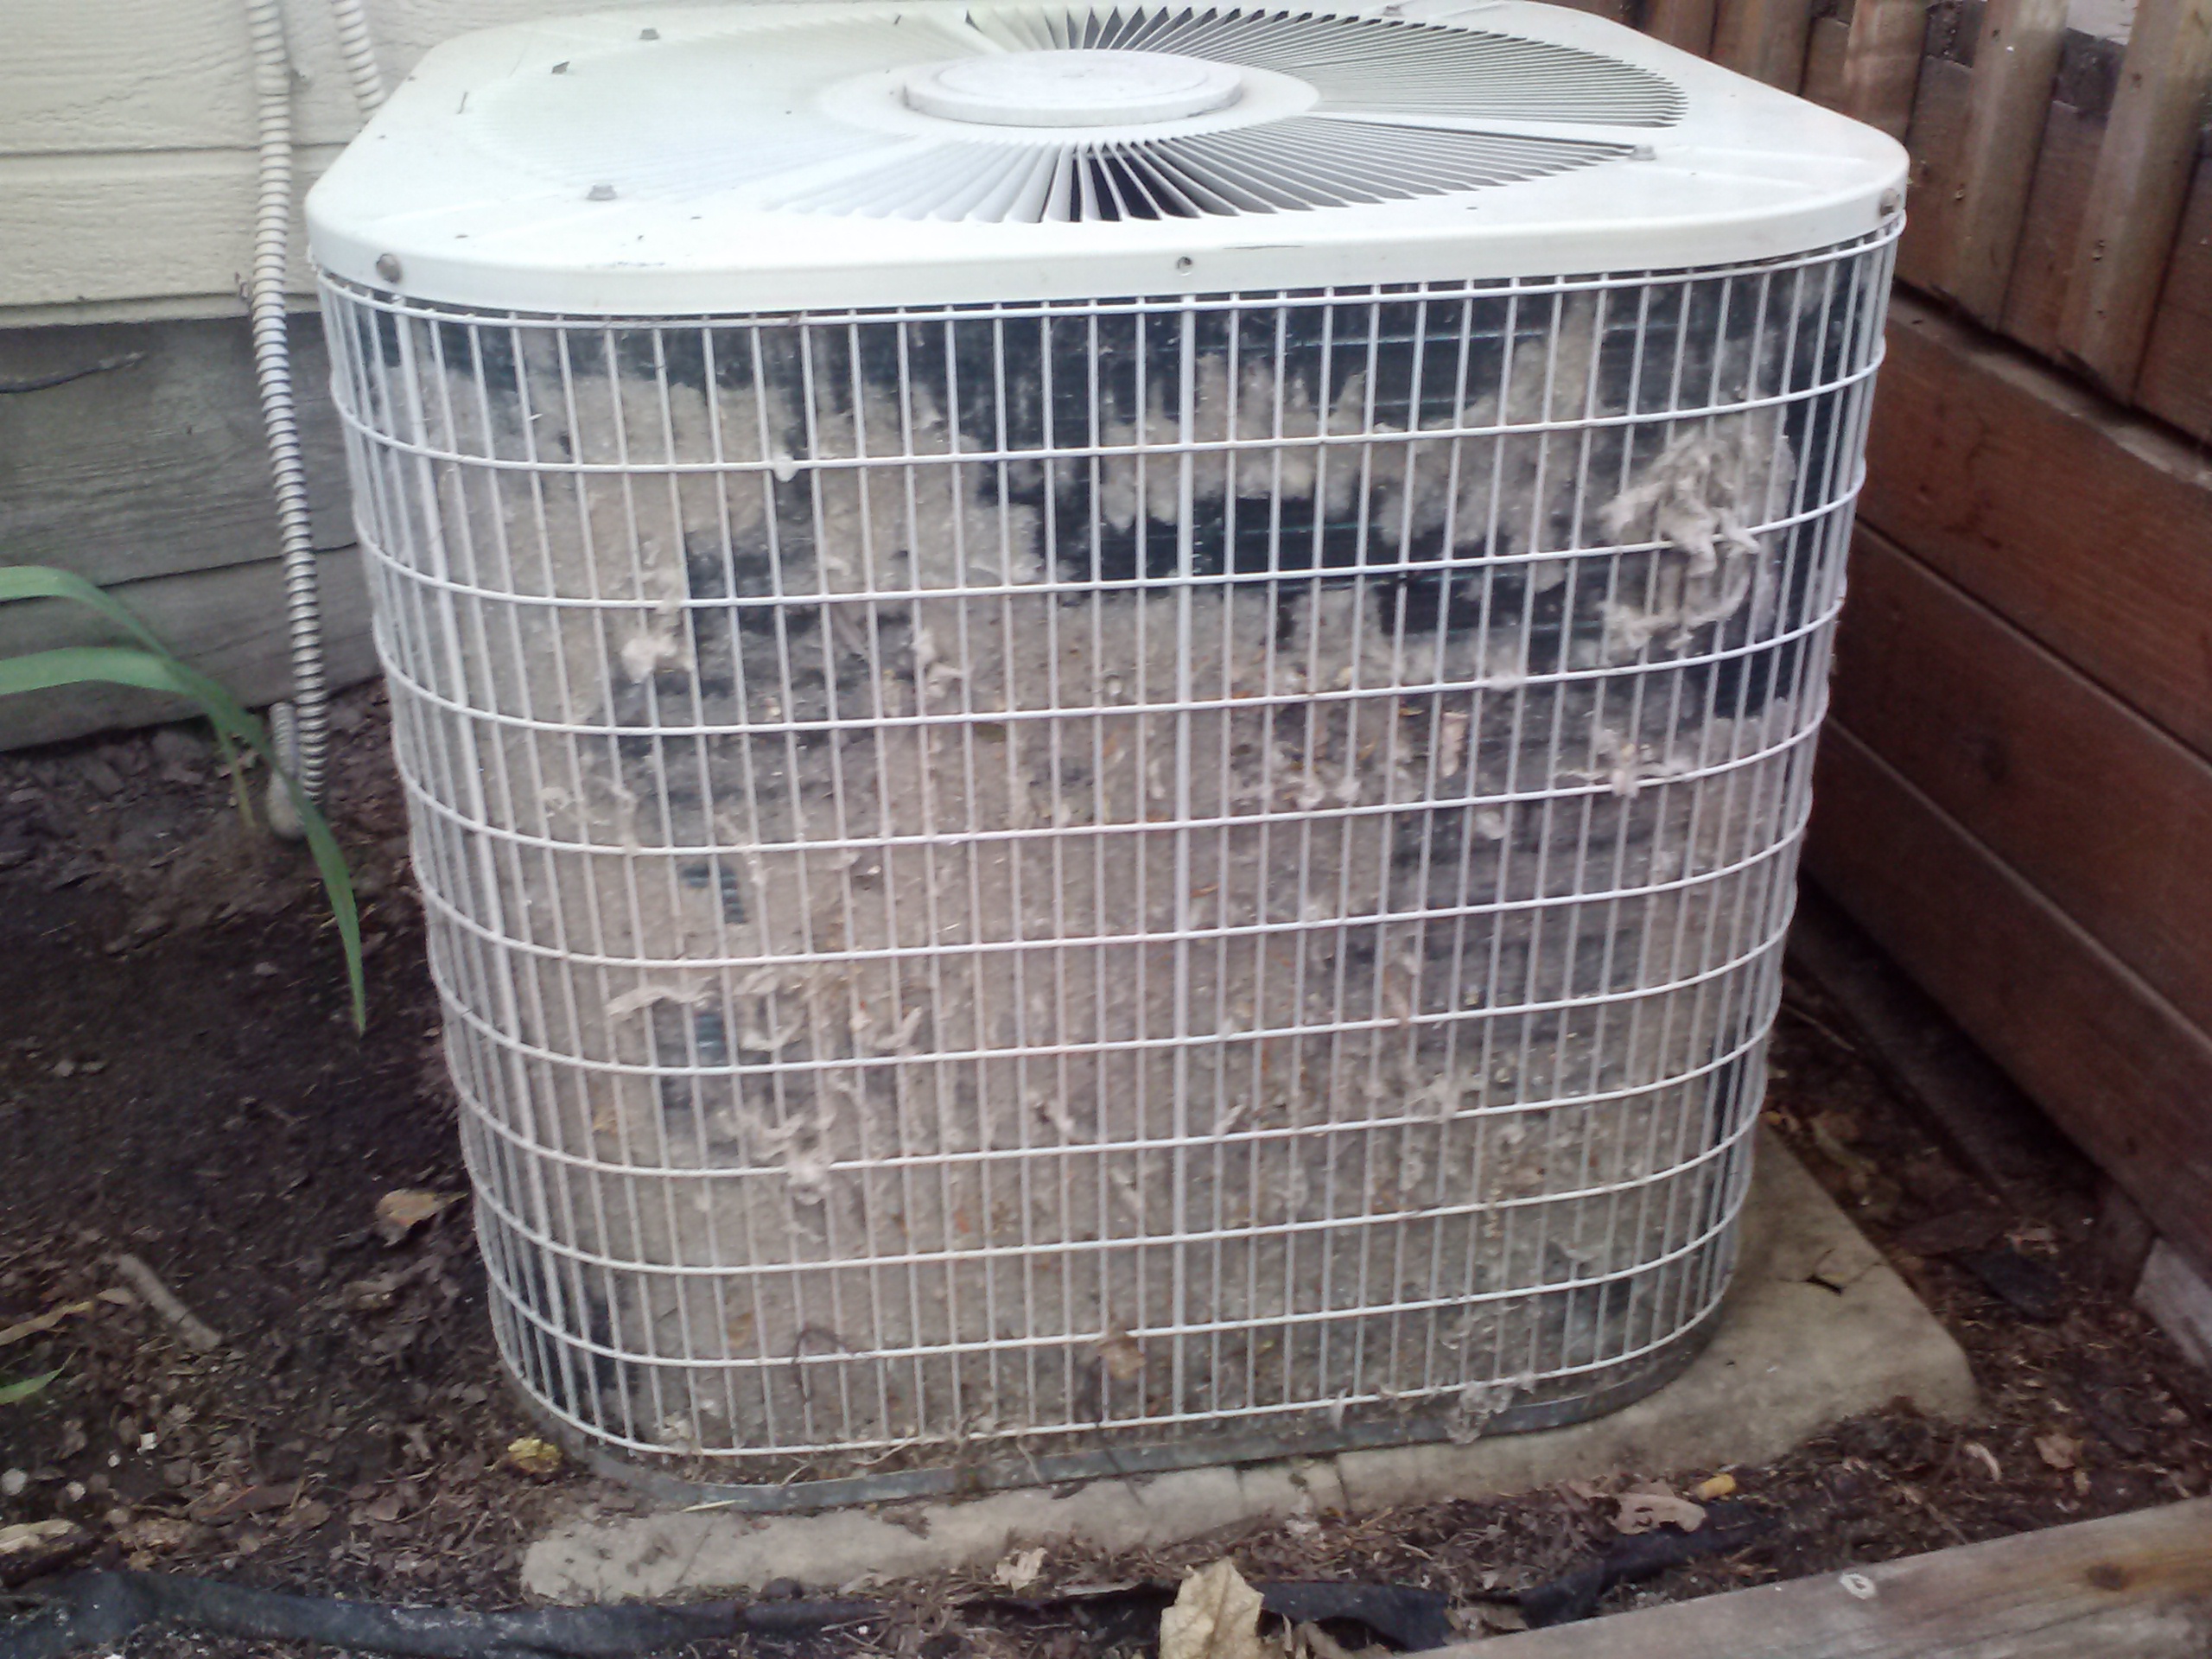 Air Conditioning Repair Boise - The Smart Choice - valueheating.com